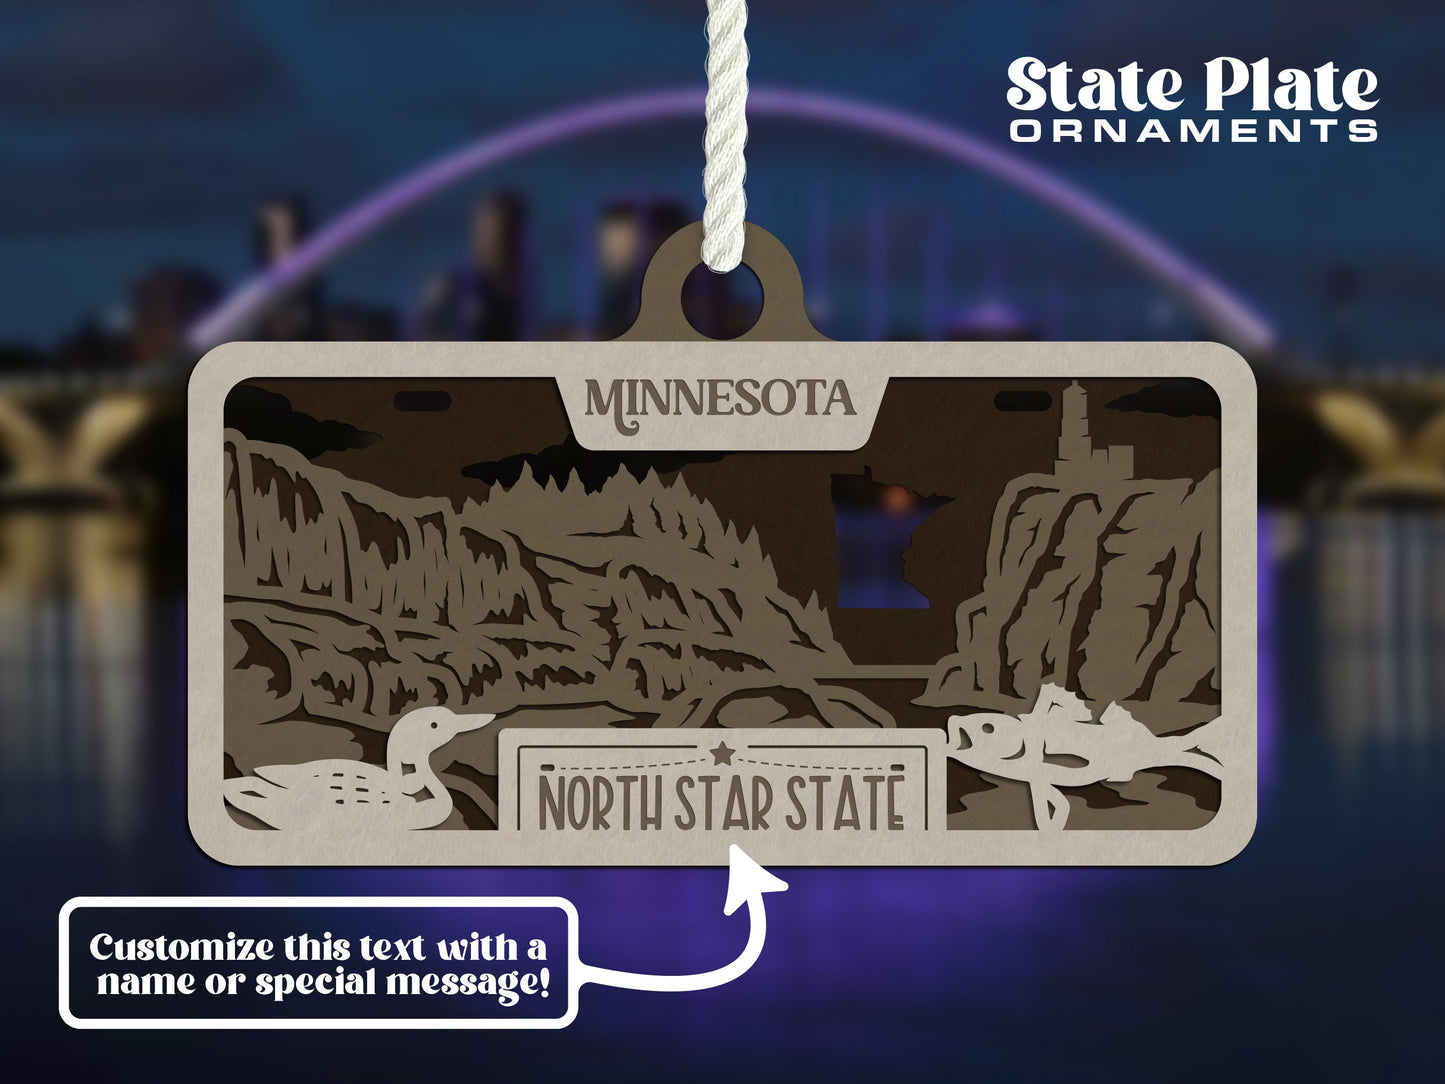 Minnesota State Plate Ornament and Signage - SVG File Download - Sized for Glowforge - Laser Ready Digital Files